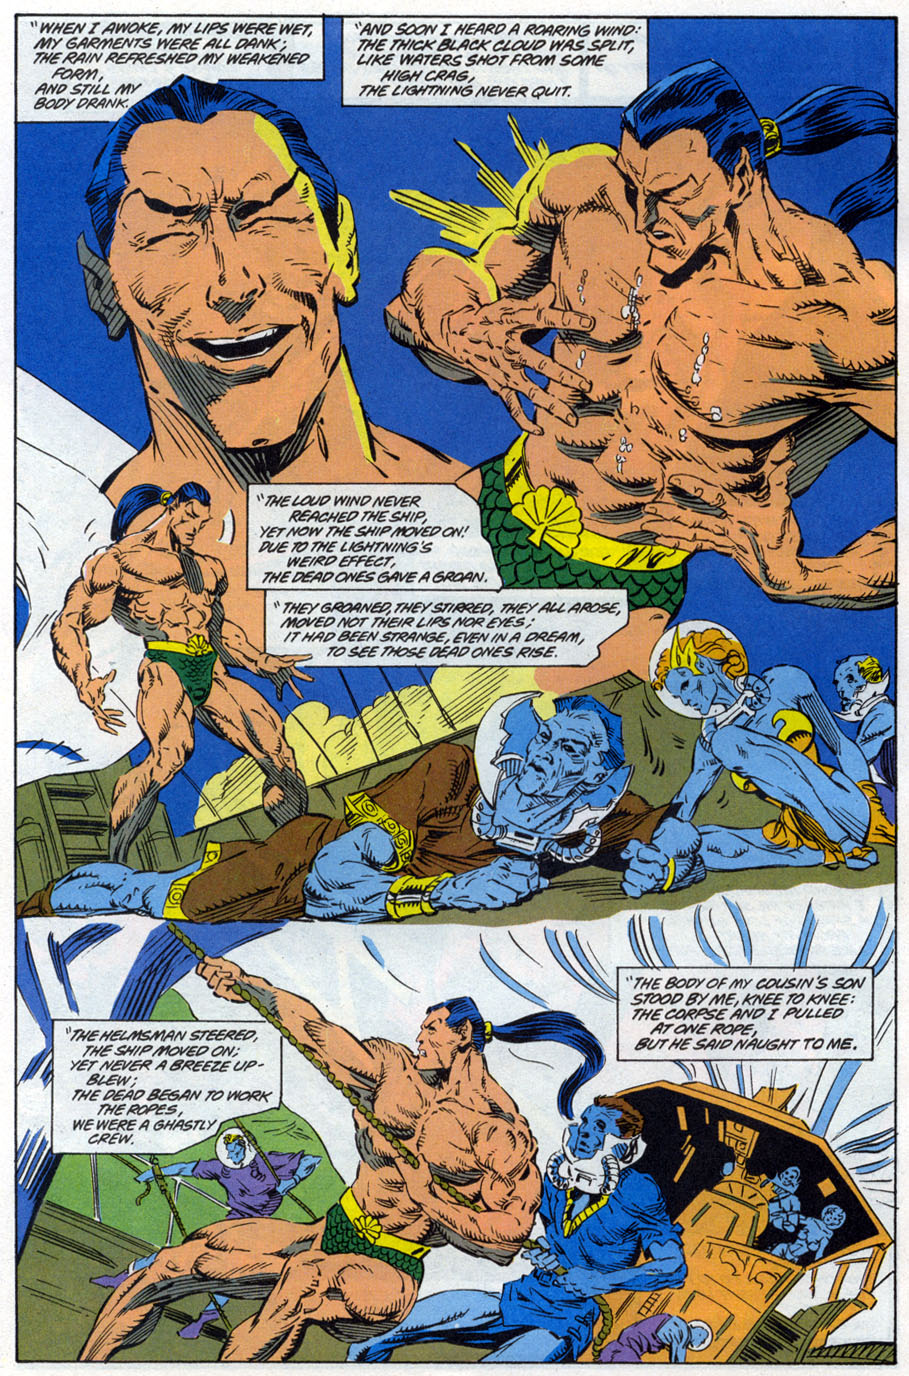 Read online Namor, The Sub-Mariner comic -  Issue #44 - 16